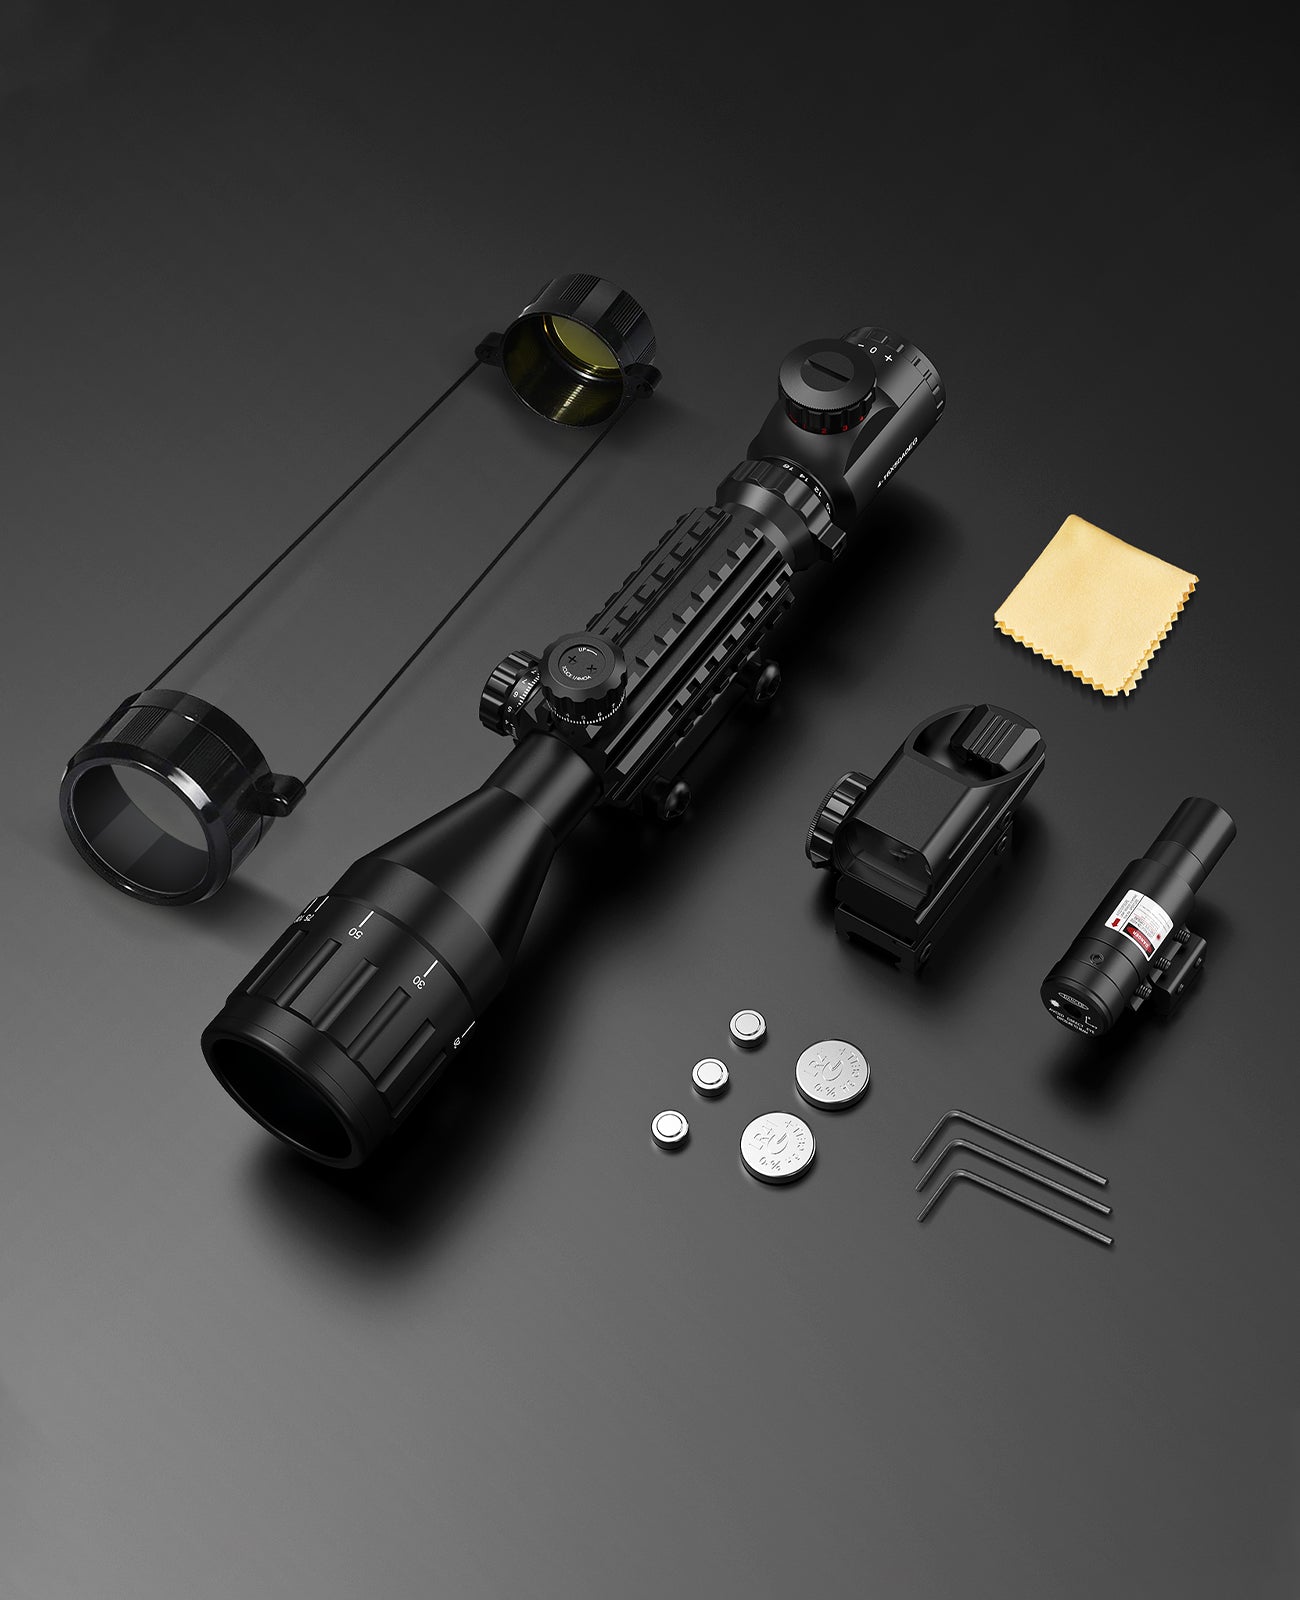 Riflescope Combo Package Details